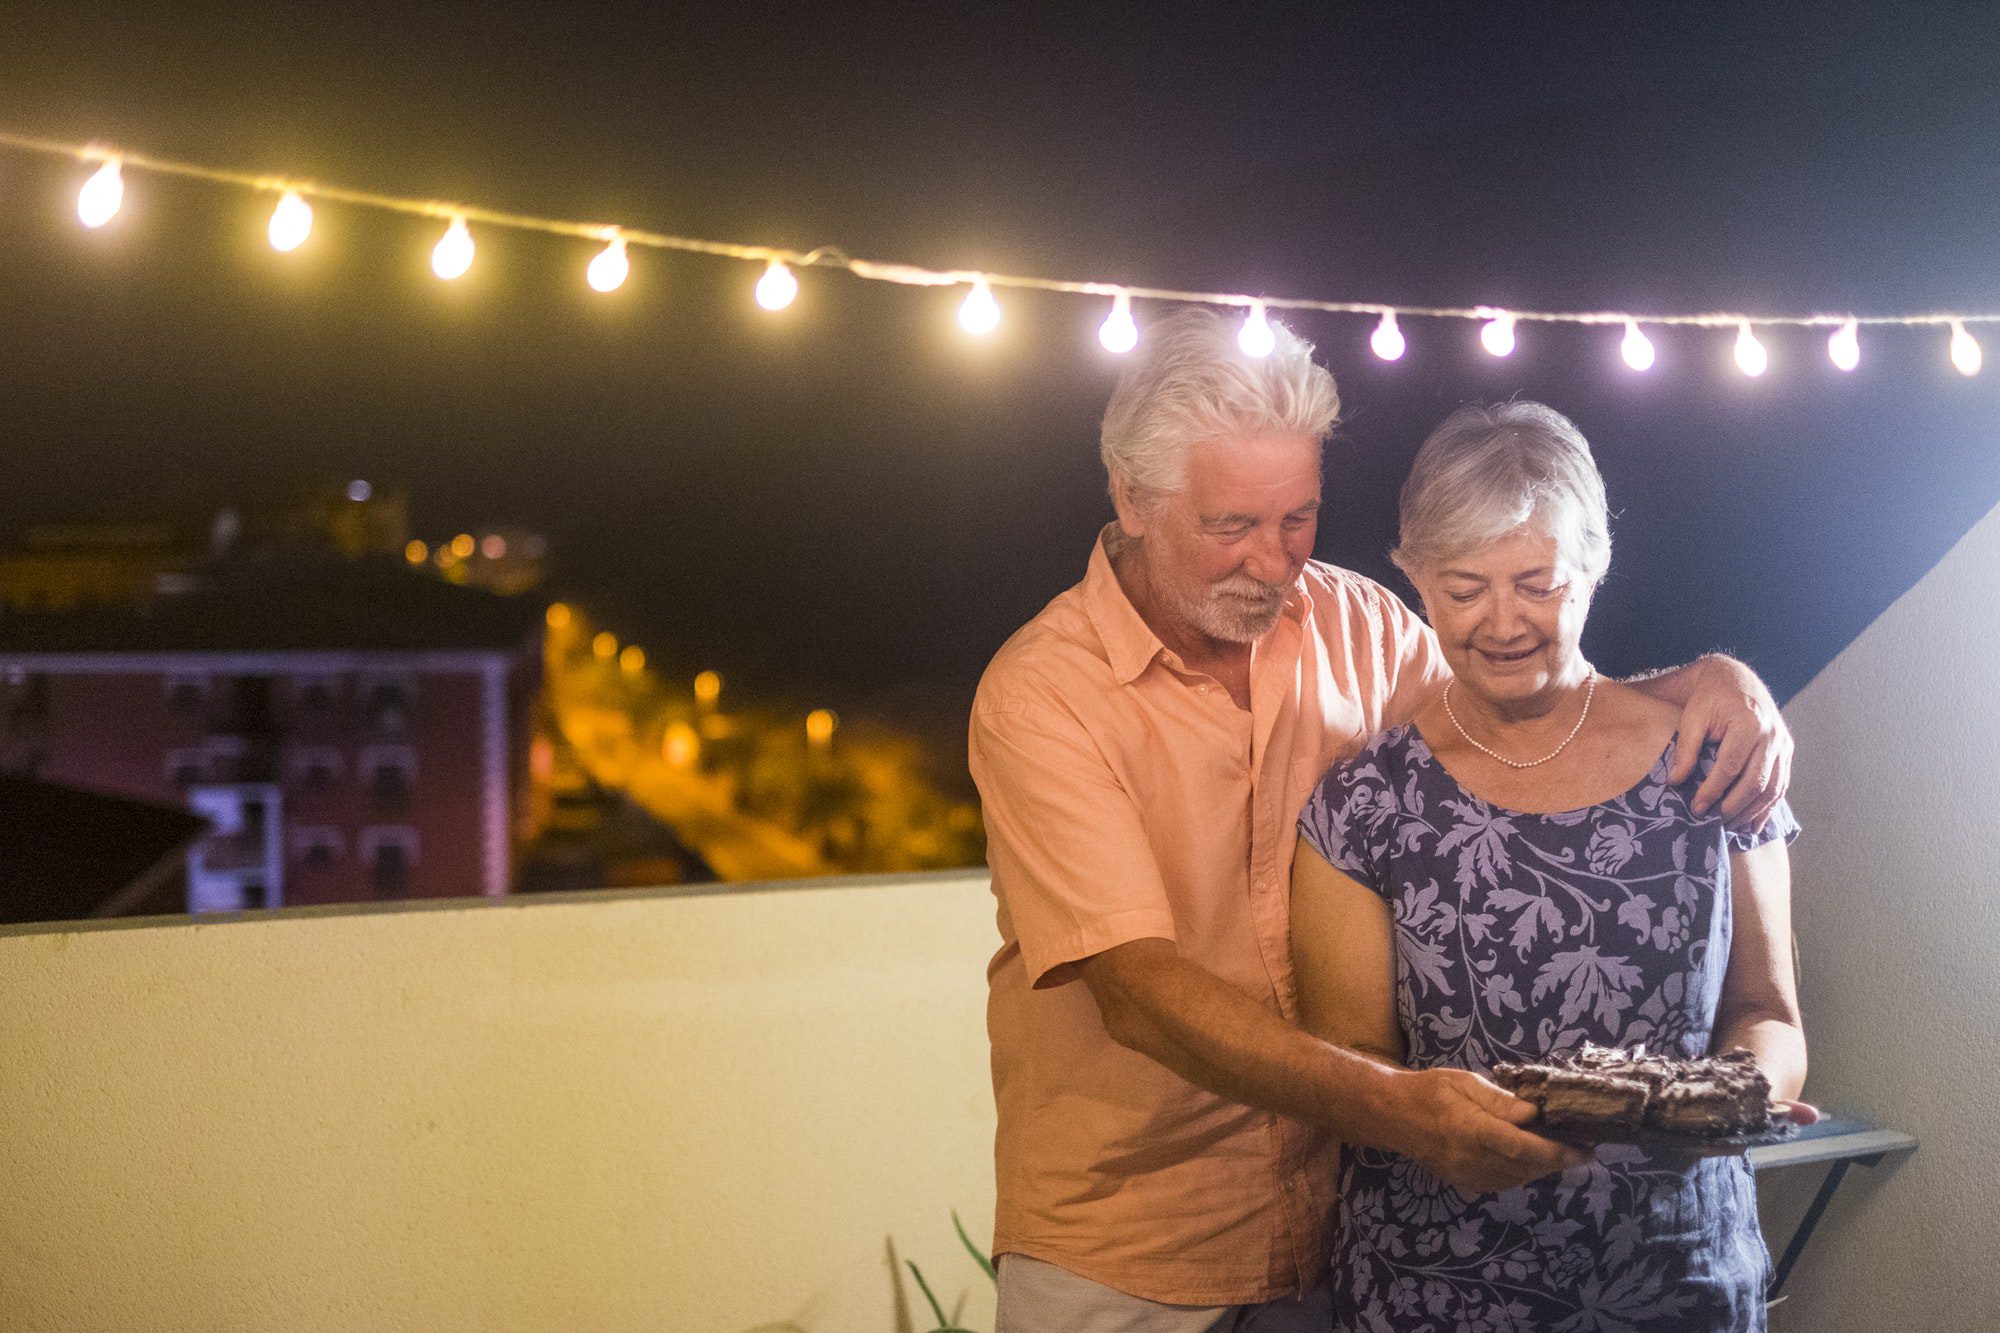 Happy senior adult couple with a chocolate cake as they discuss their social security and medicare premium increases coming in 2022.